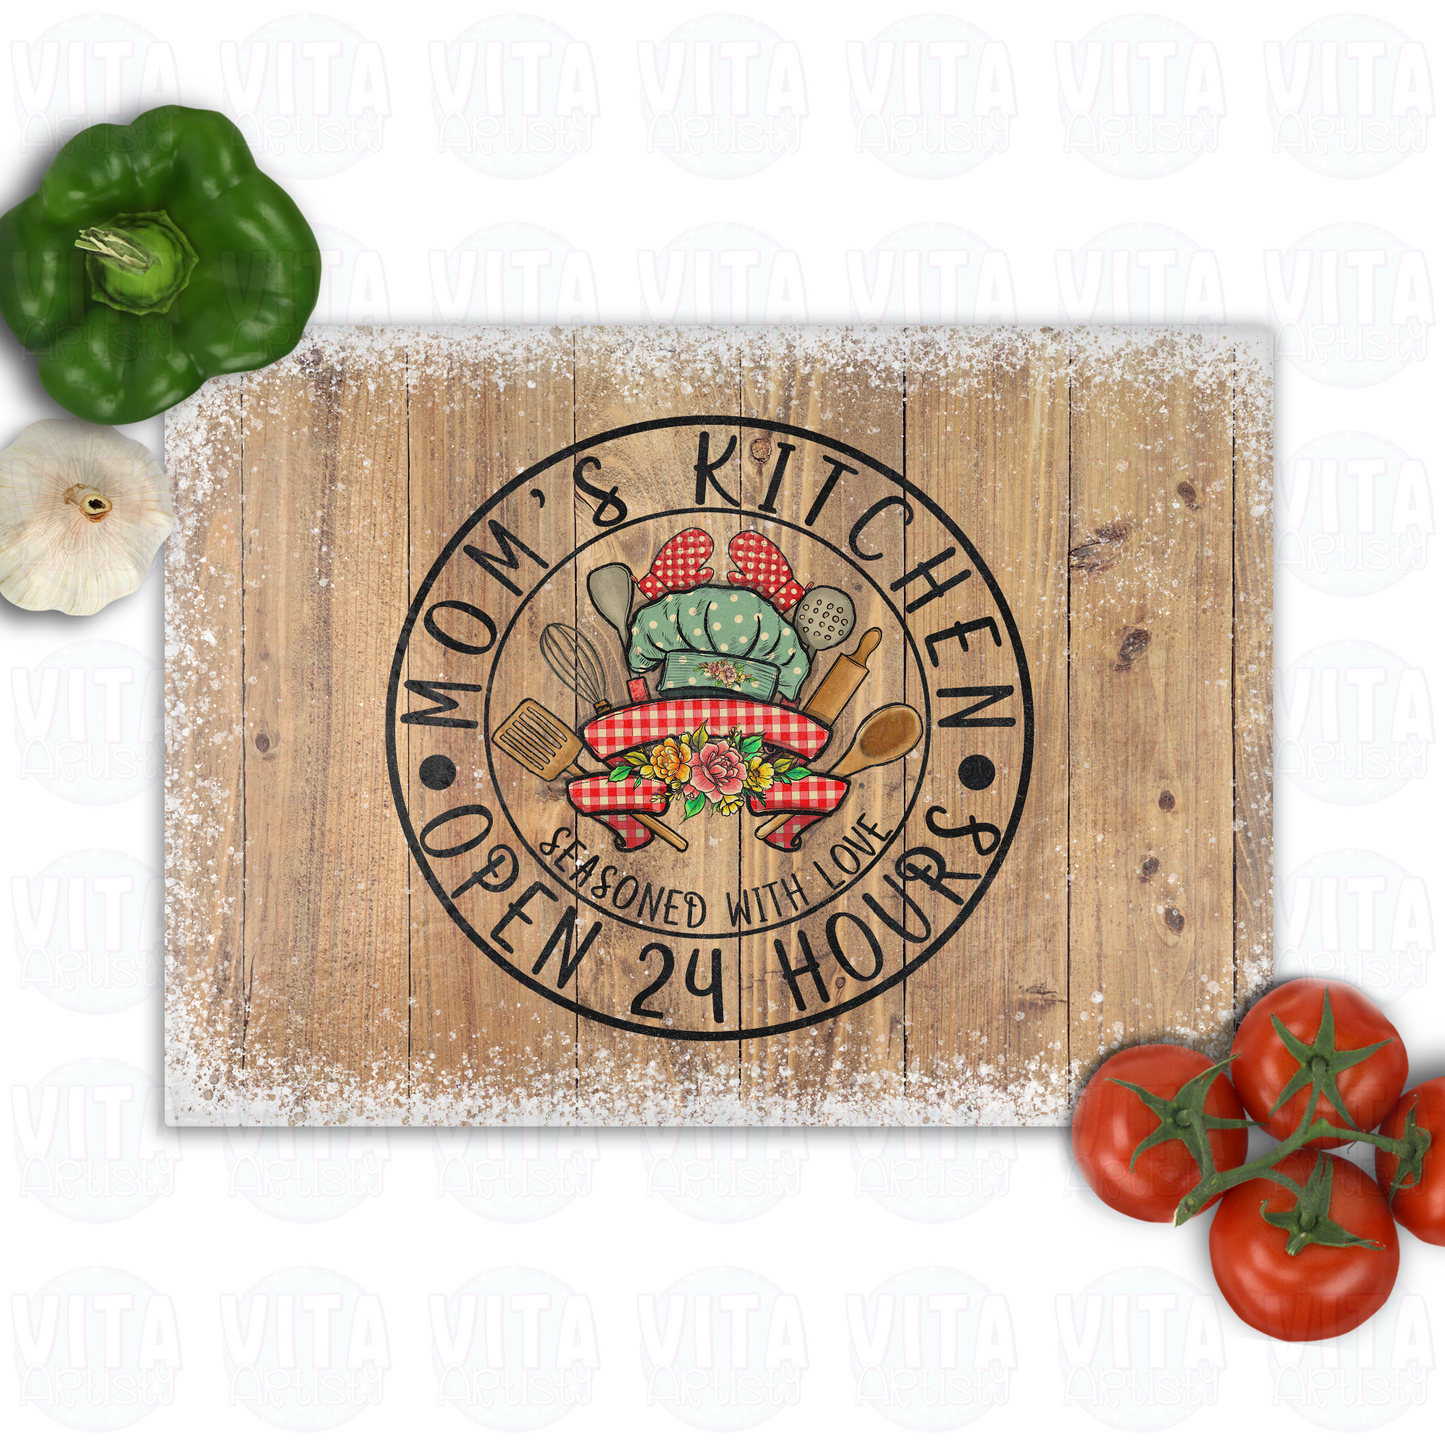 Mom's Kitchen Open 24 Hours - Vintage Style Glass Cutting Board